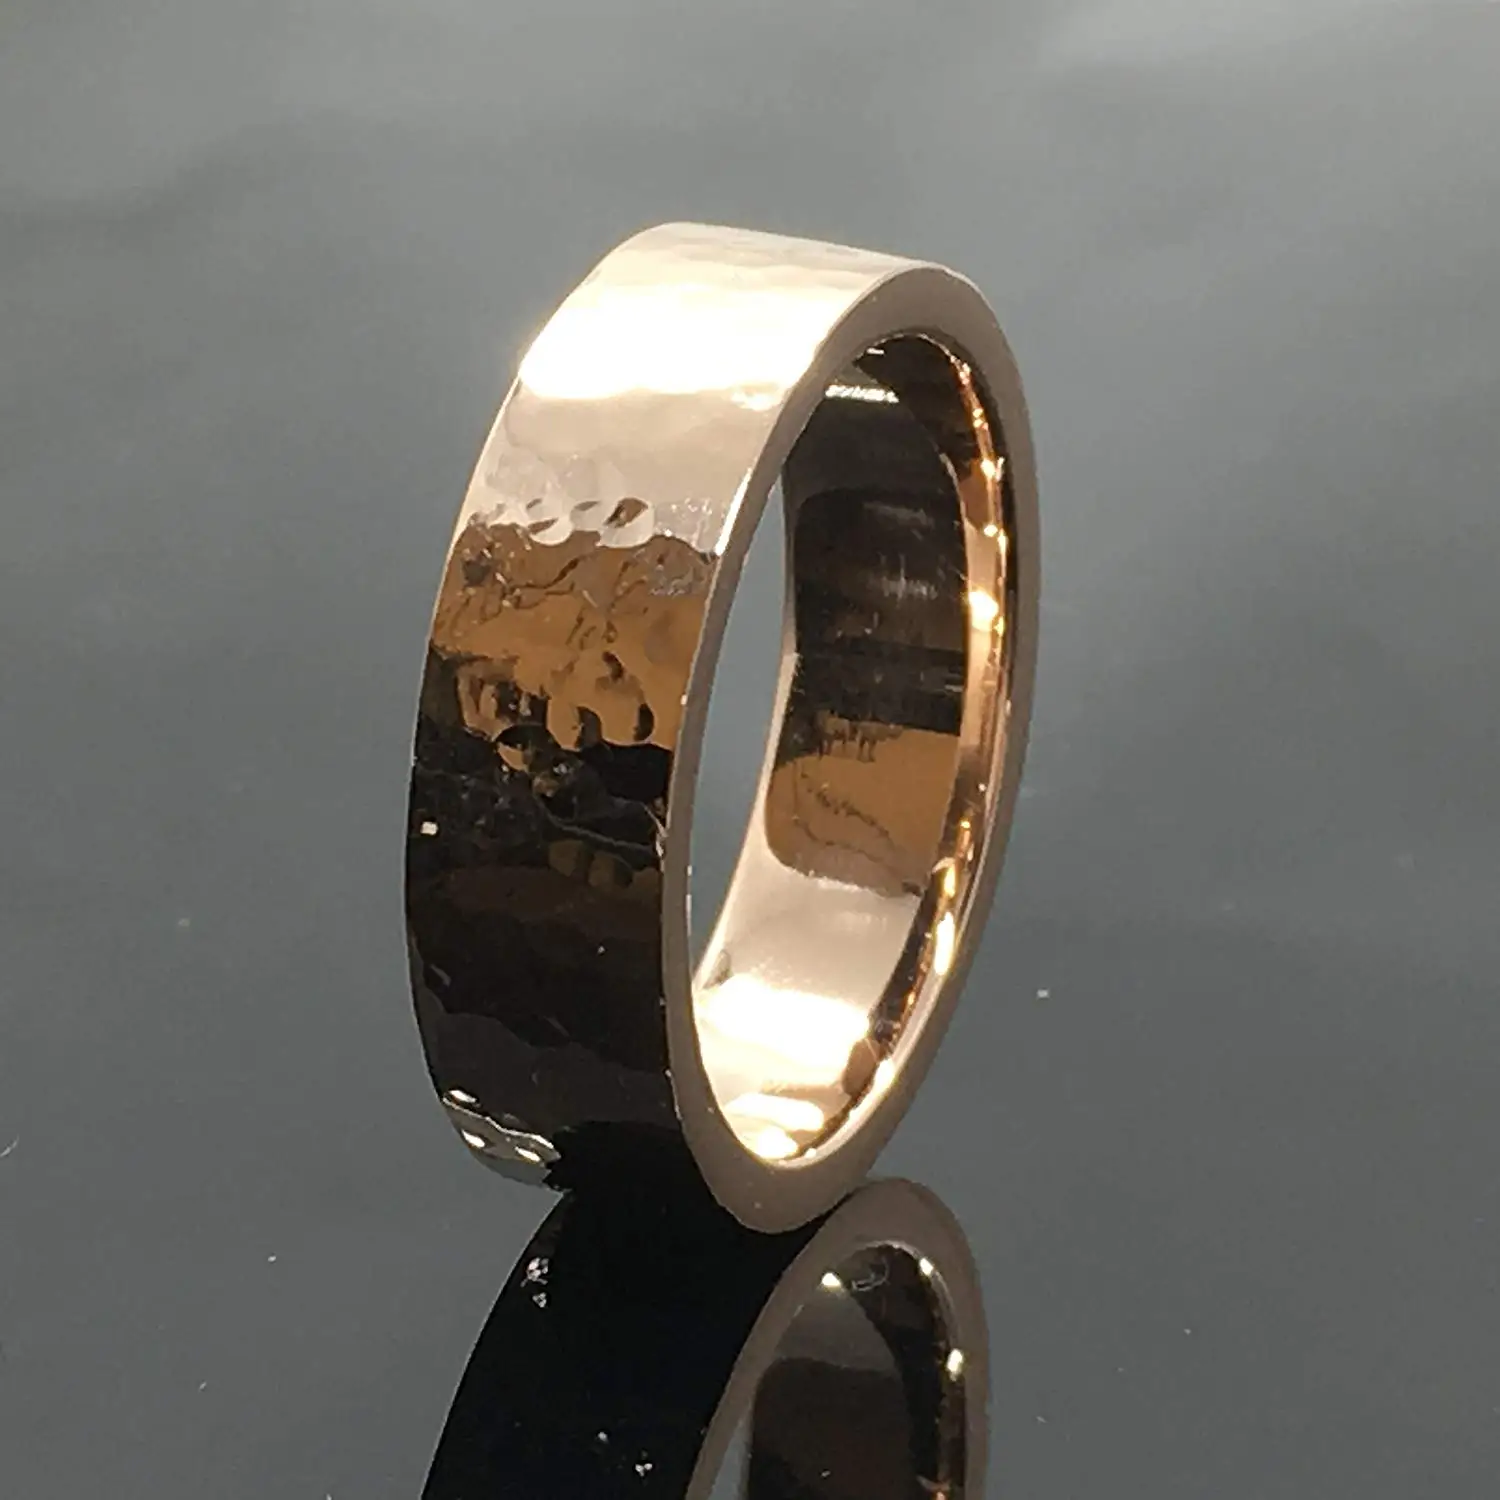 Cheap Rose Gold Male Wedding Ring Find Rose Gold Male Wedding Ring